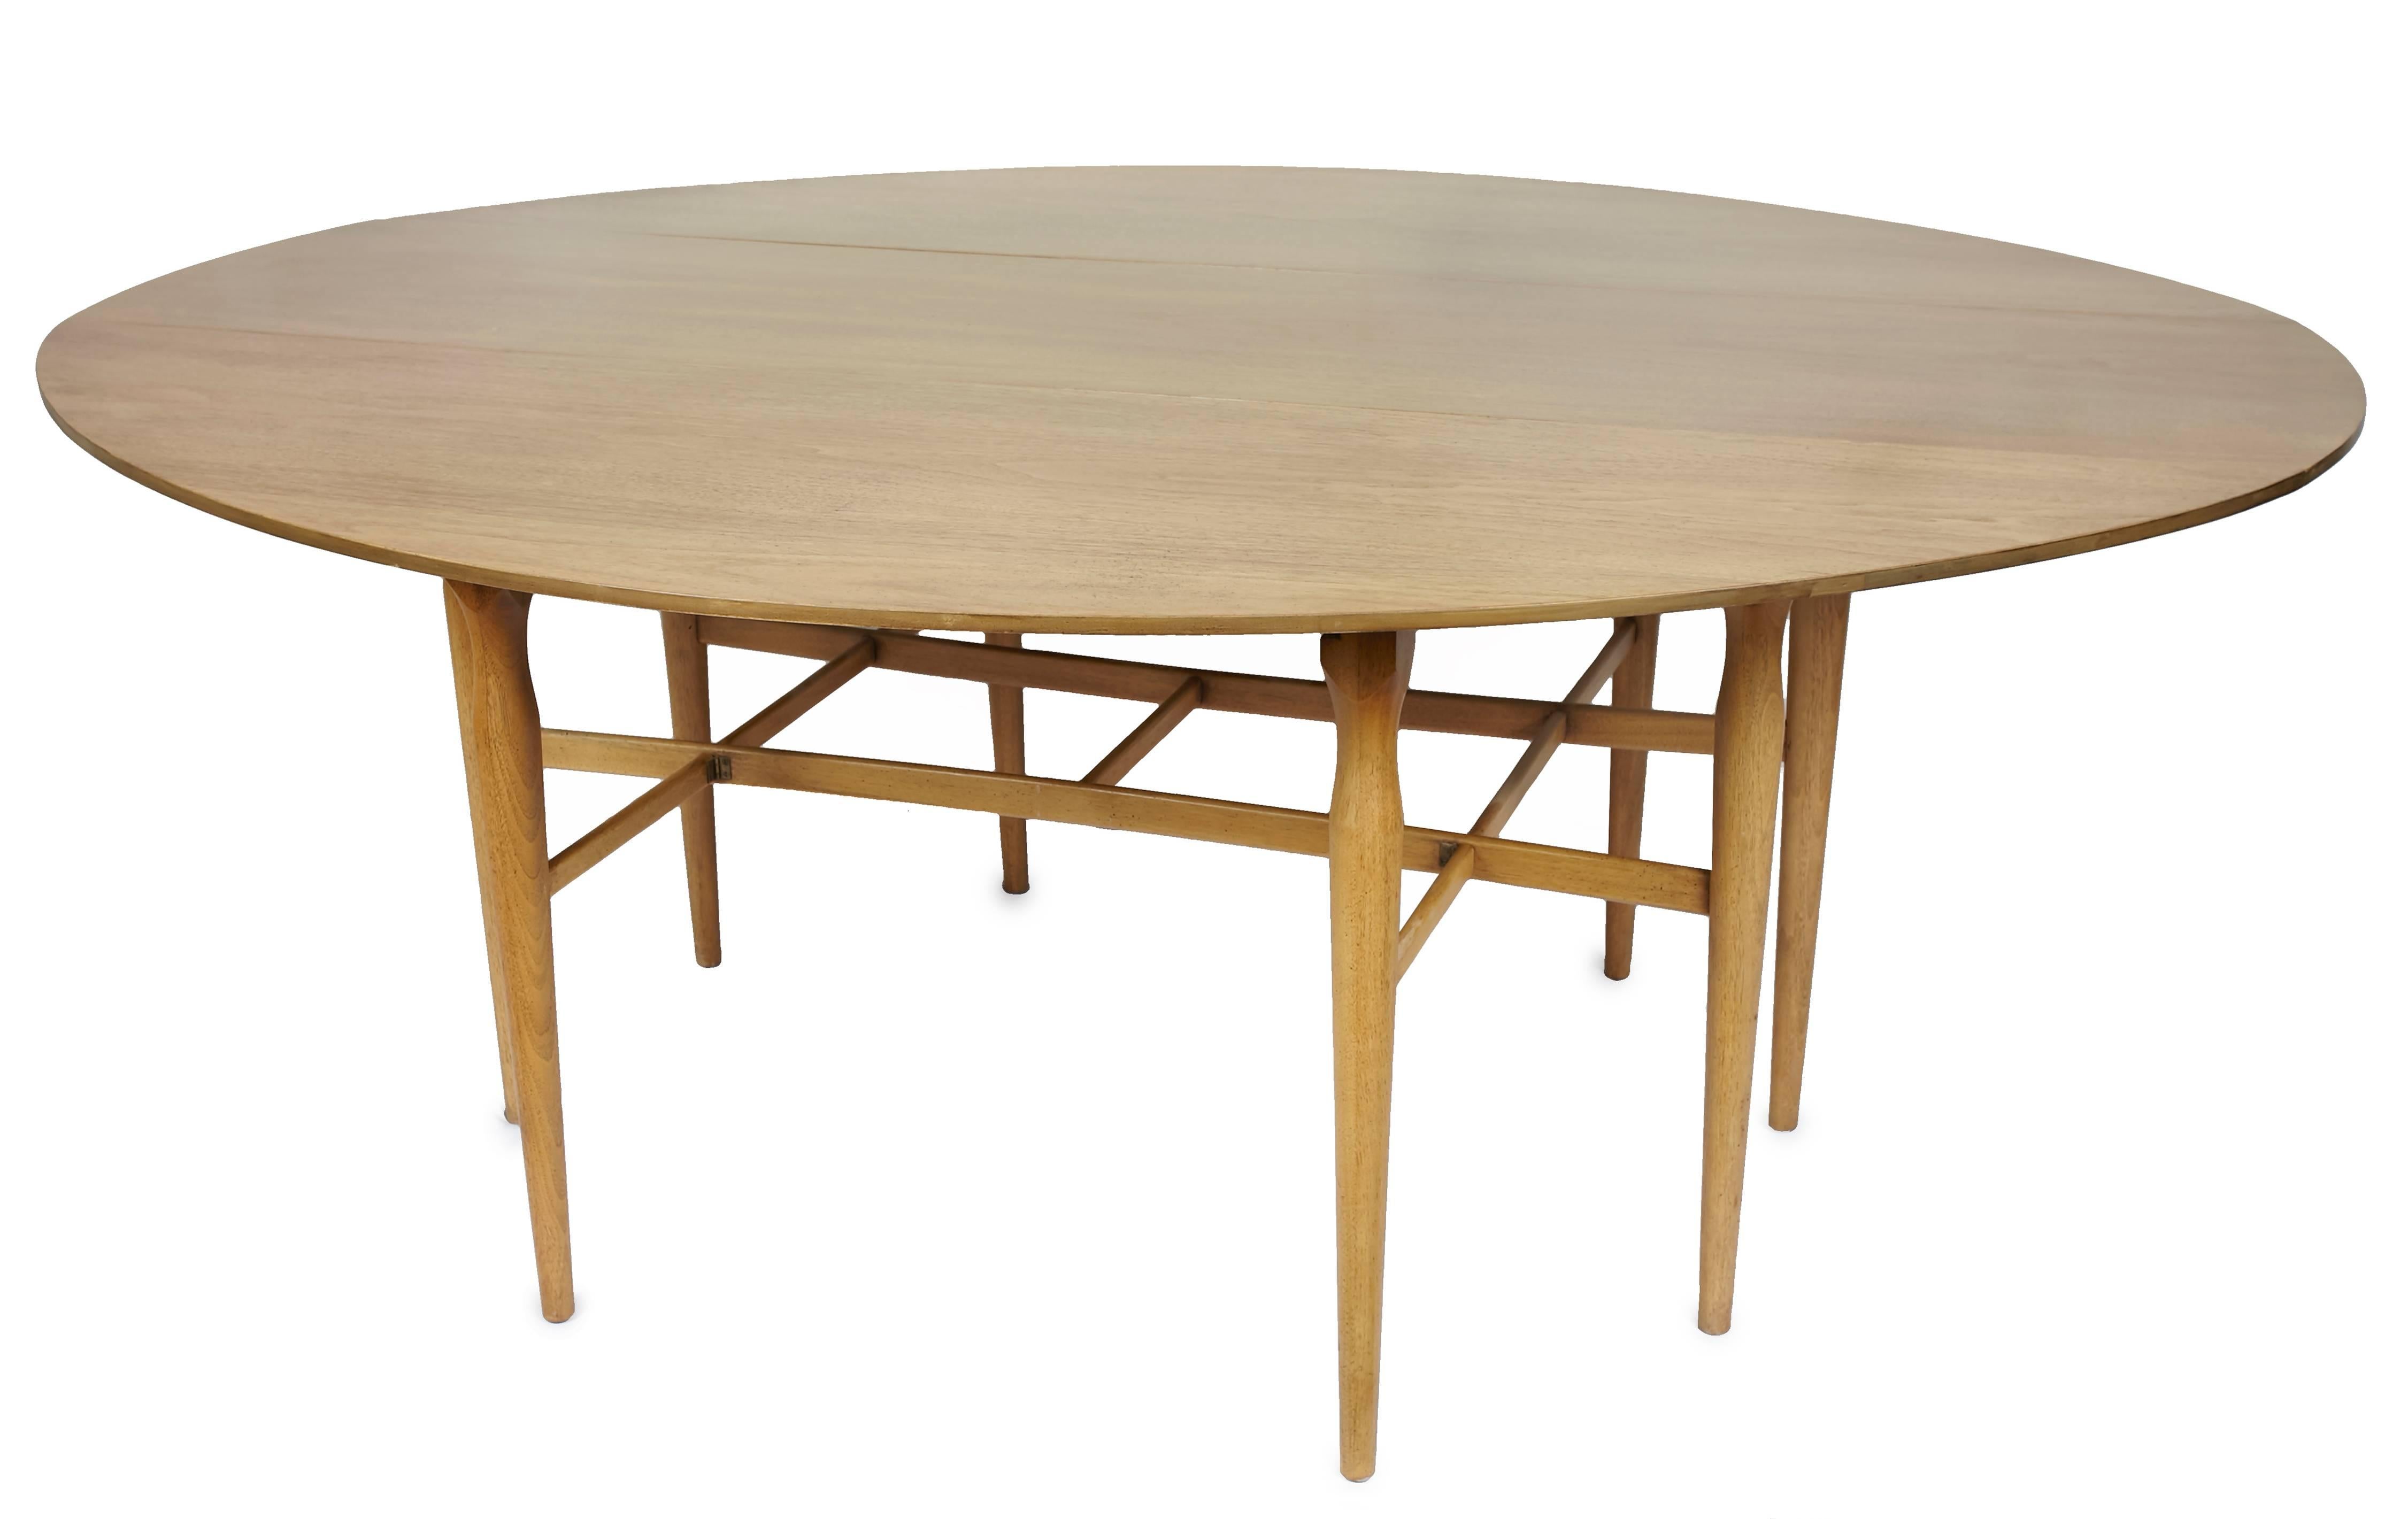 Restored Heretage Henredon gateleg table.
Top measures 19.5 inches deep when sides are down. When sides are up the table measures 72 inches wide and 60 inches long.
Eight tapered legs.